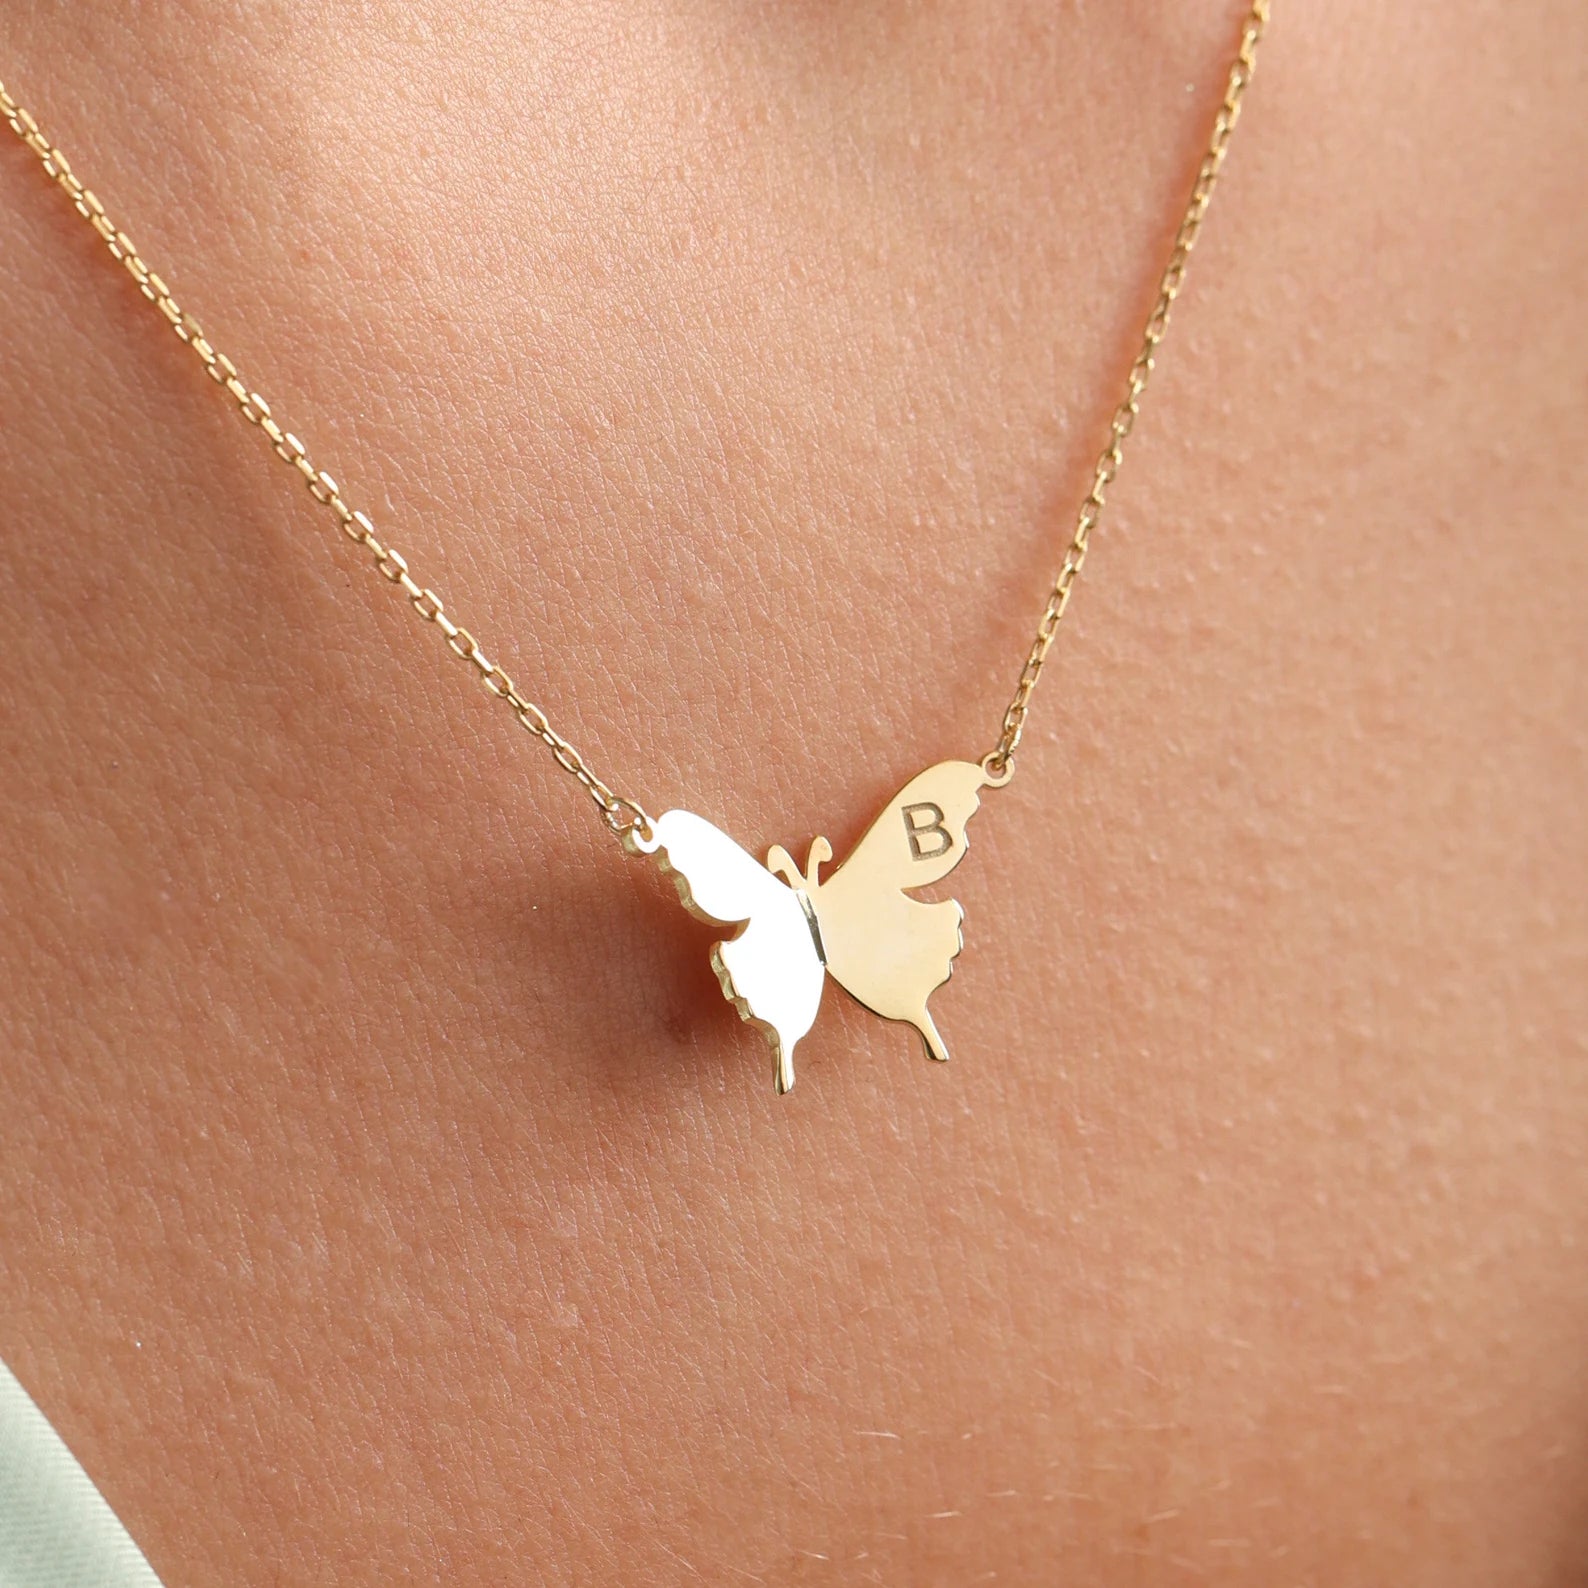 Gold butterfly necklace, handcrafted in Dubai, United Arab Emirates.